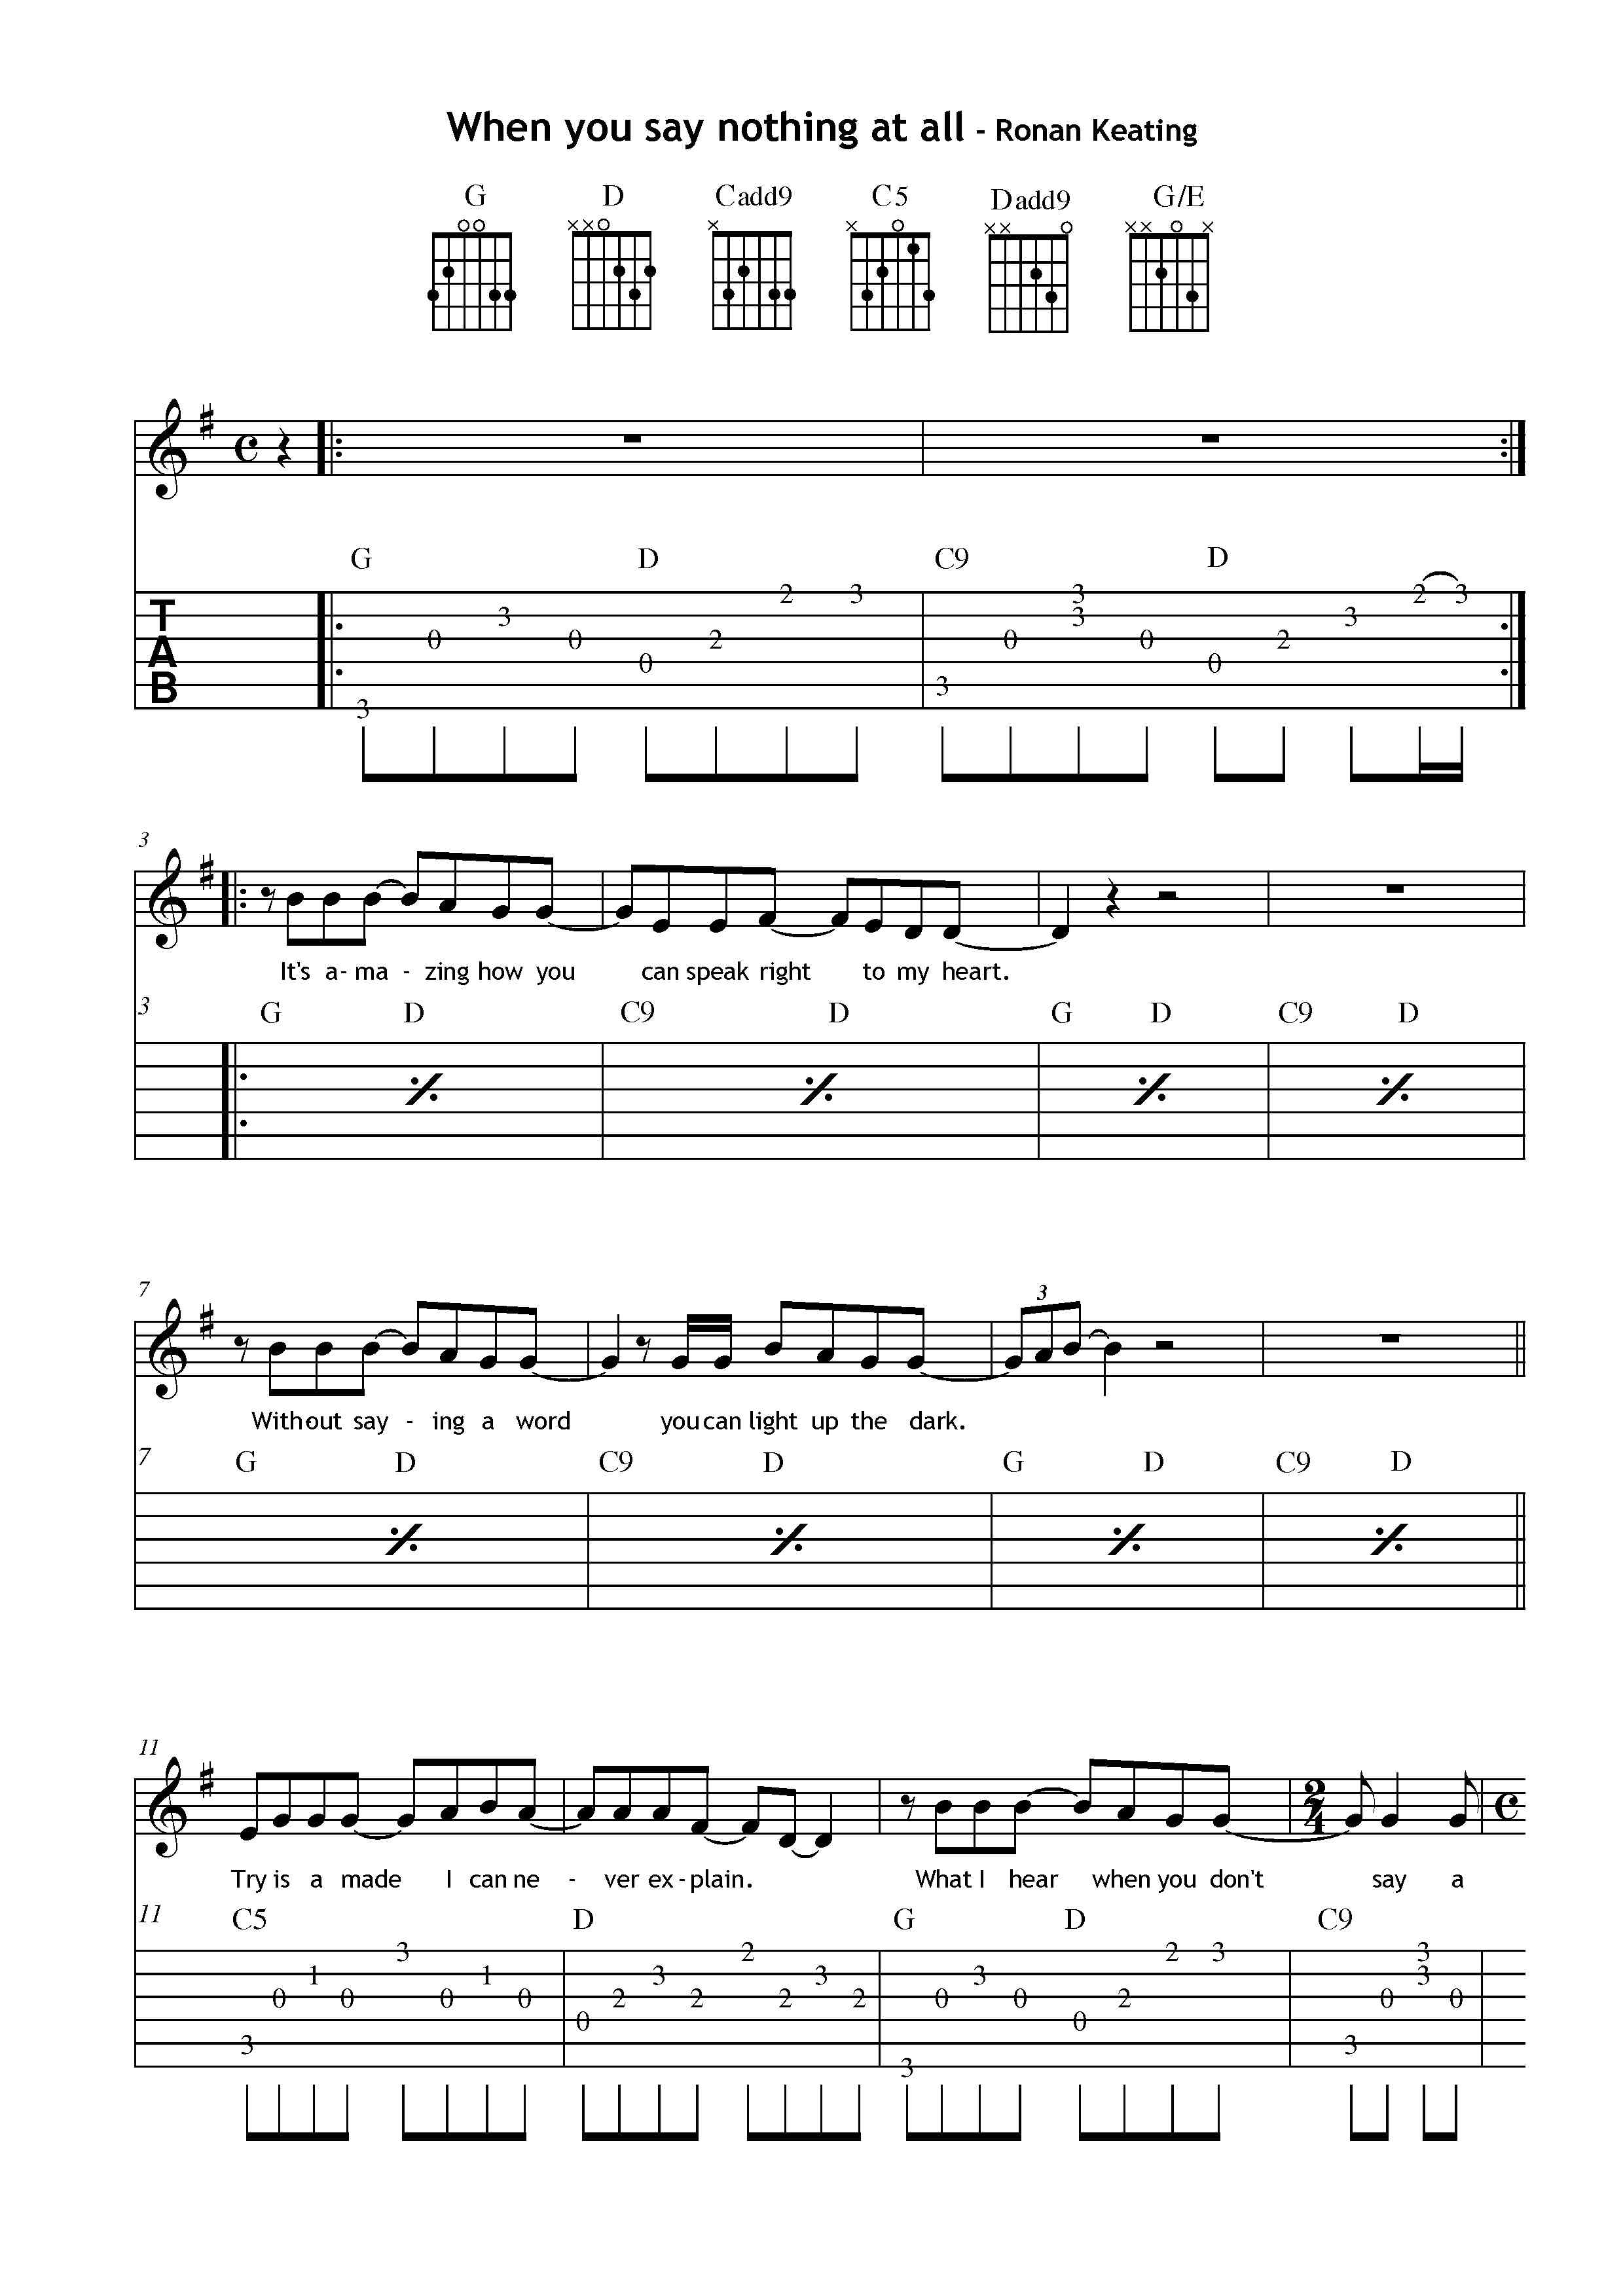 When you say nothing at all piano sheet music pdf